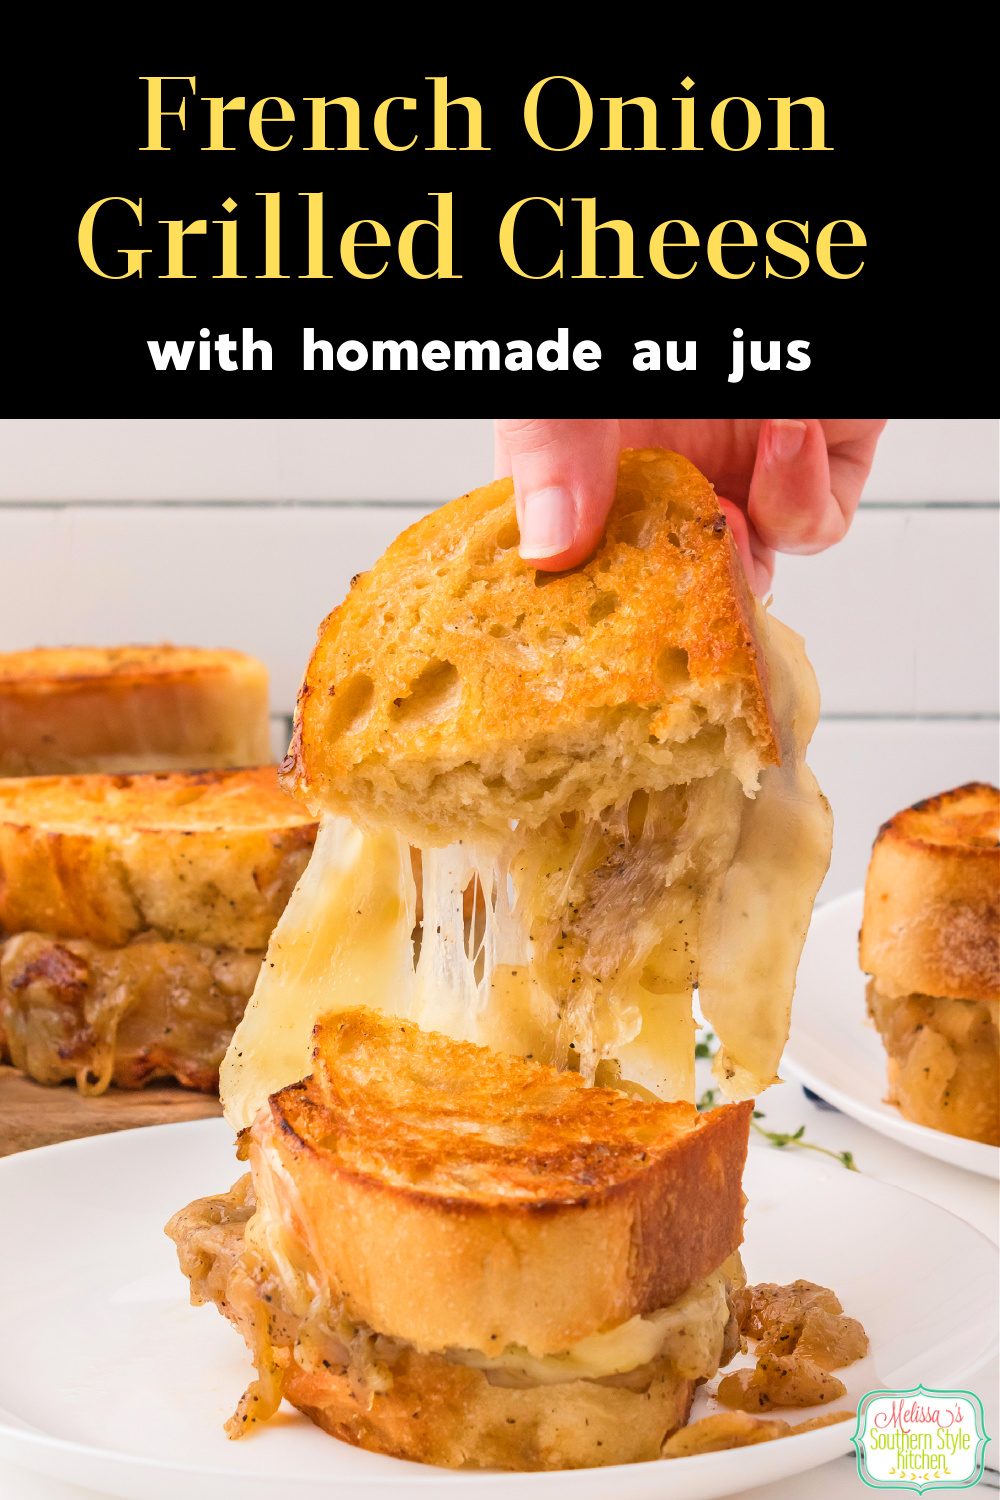 This gooey French Onion Grilled Cheese recipe is served with a bowl of  homemade au jus on the side for dipping #frenchonions #frenchoniongrilledcheese #grilledcheeserecipes #howtomakefrenchonions #aujusrecipe #bestfrenchonionrecipes